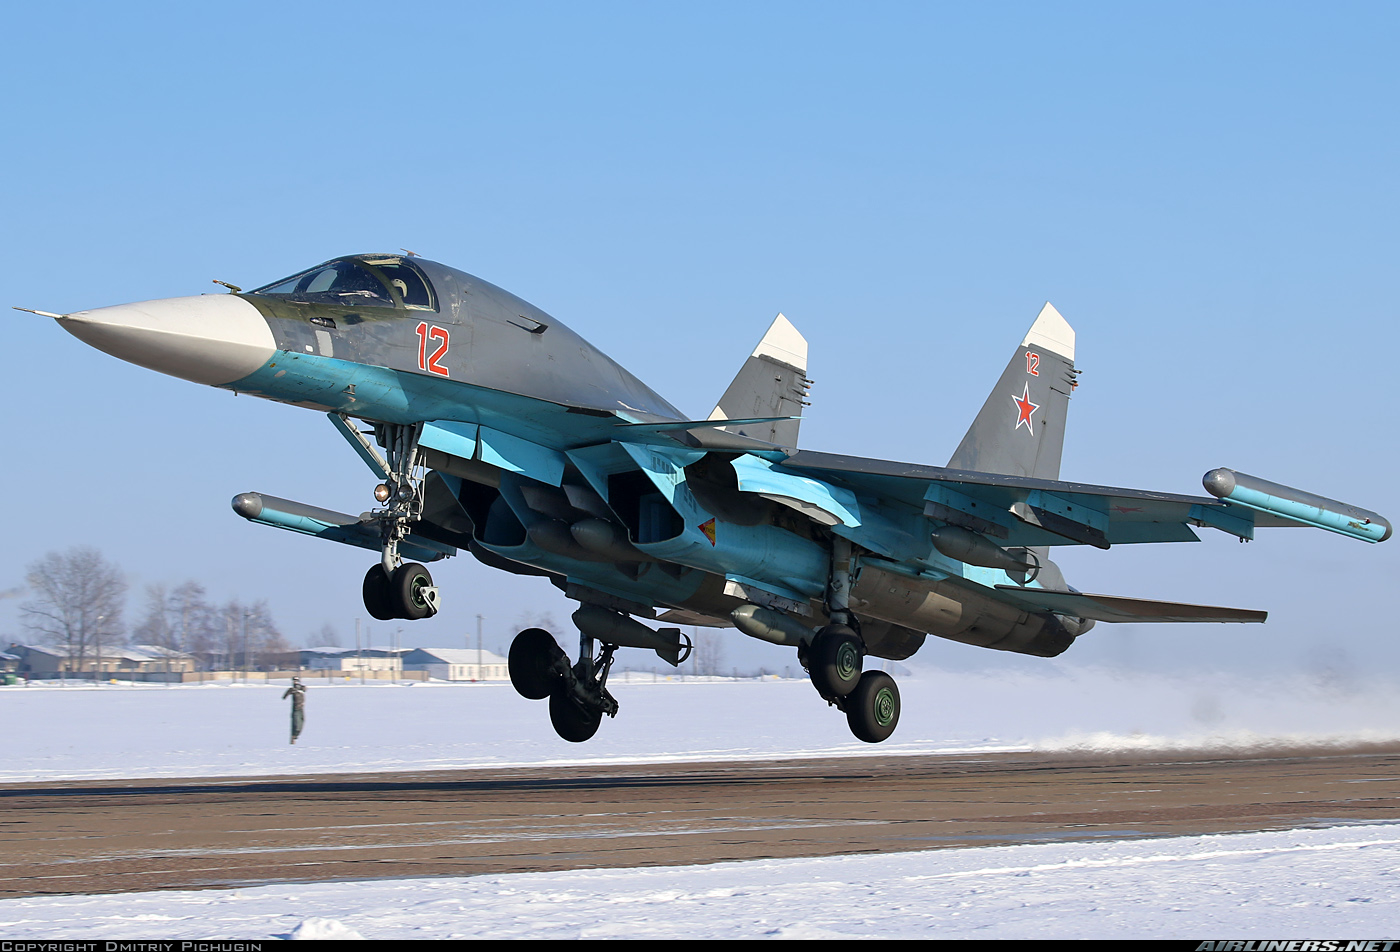 Sukhoi Su-34 - Russia - Air Force | Aviation Photo #6101713 | Airliners.net